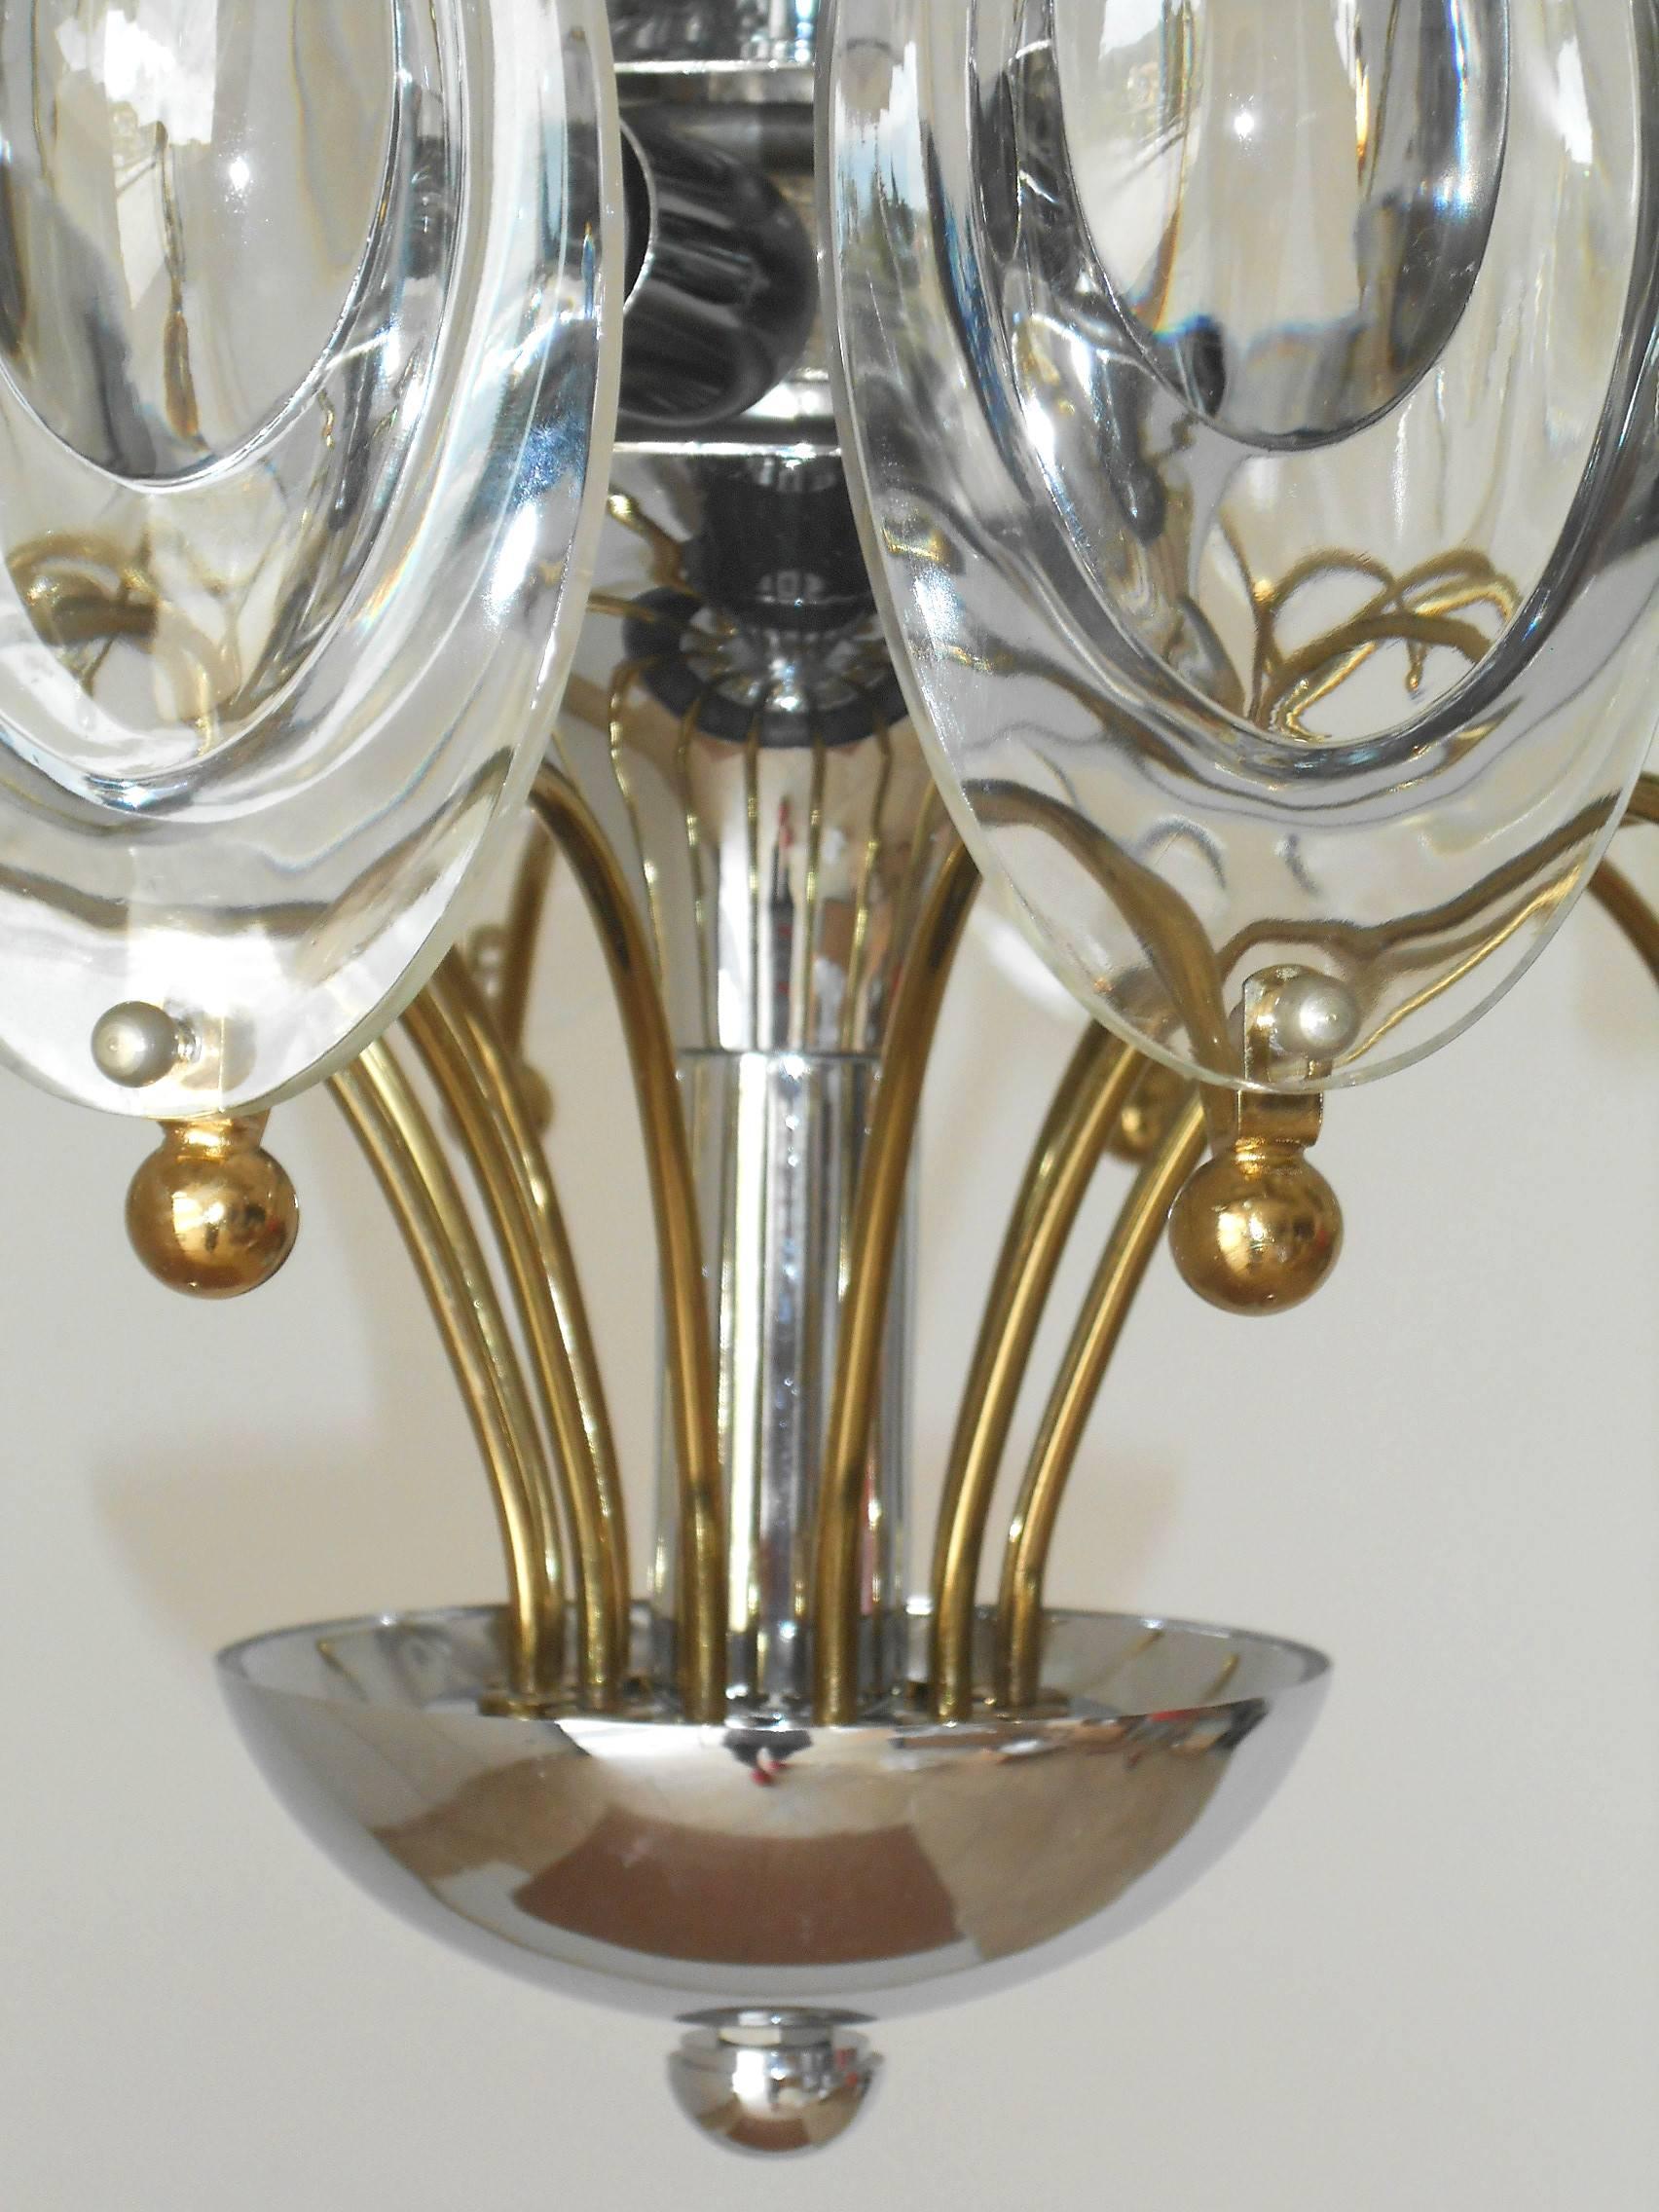 Vintage Italian chandelier or pendant with cut-glass lenses, mounted on chrome and brass frame / Designed by Sciolari circa 1960’s / Made in Italy 
6 lights / E12 or E14 type / max 40W each
Diameter: 20 inches / Height: 35.5 inches including rod and